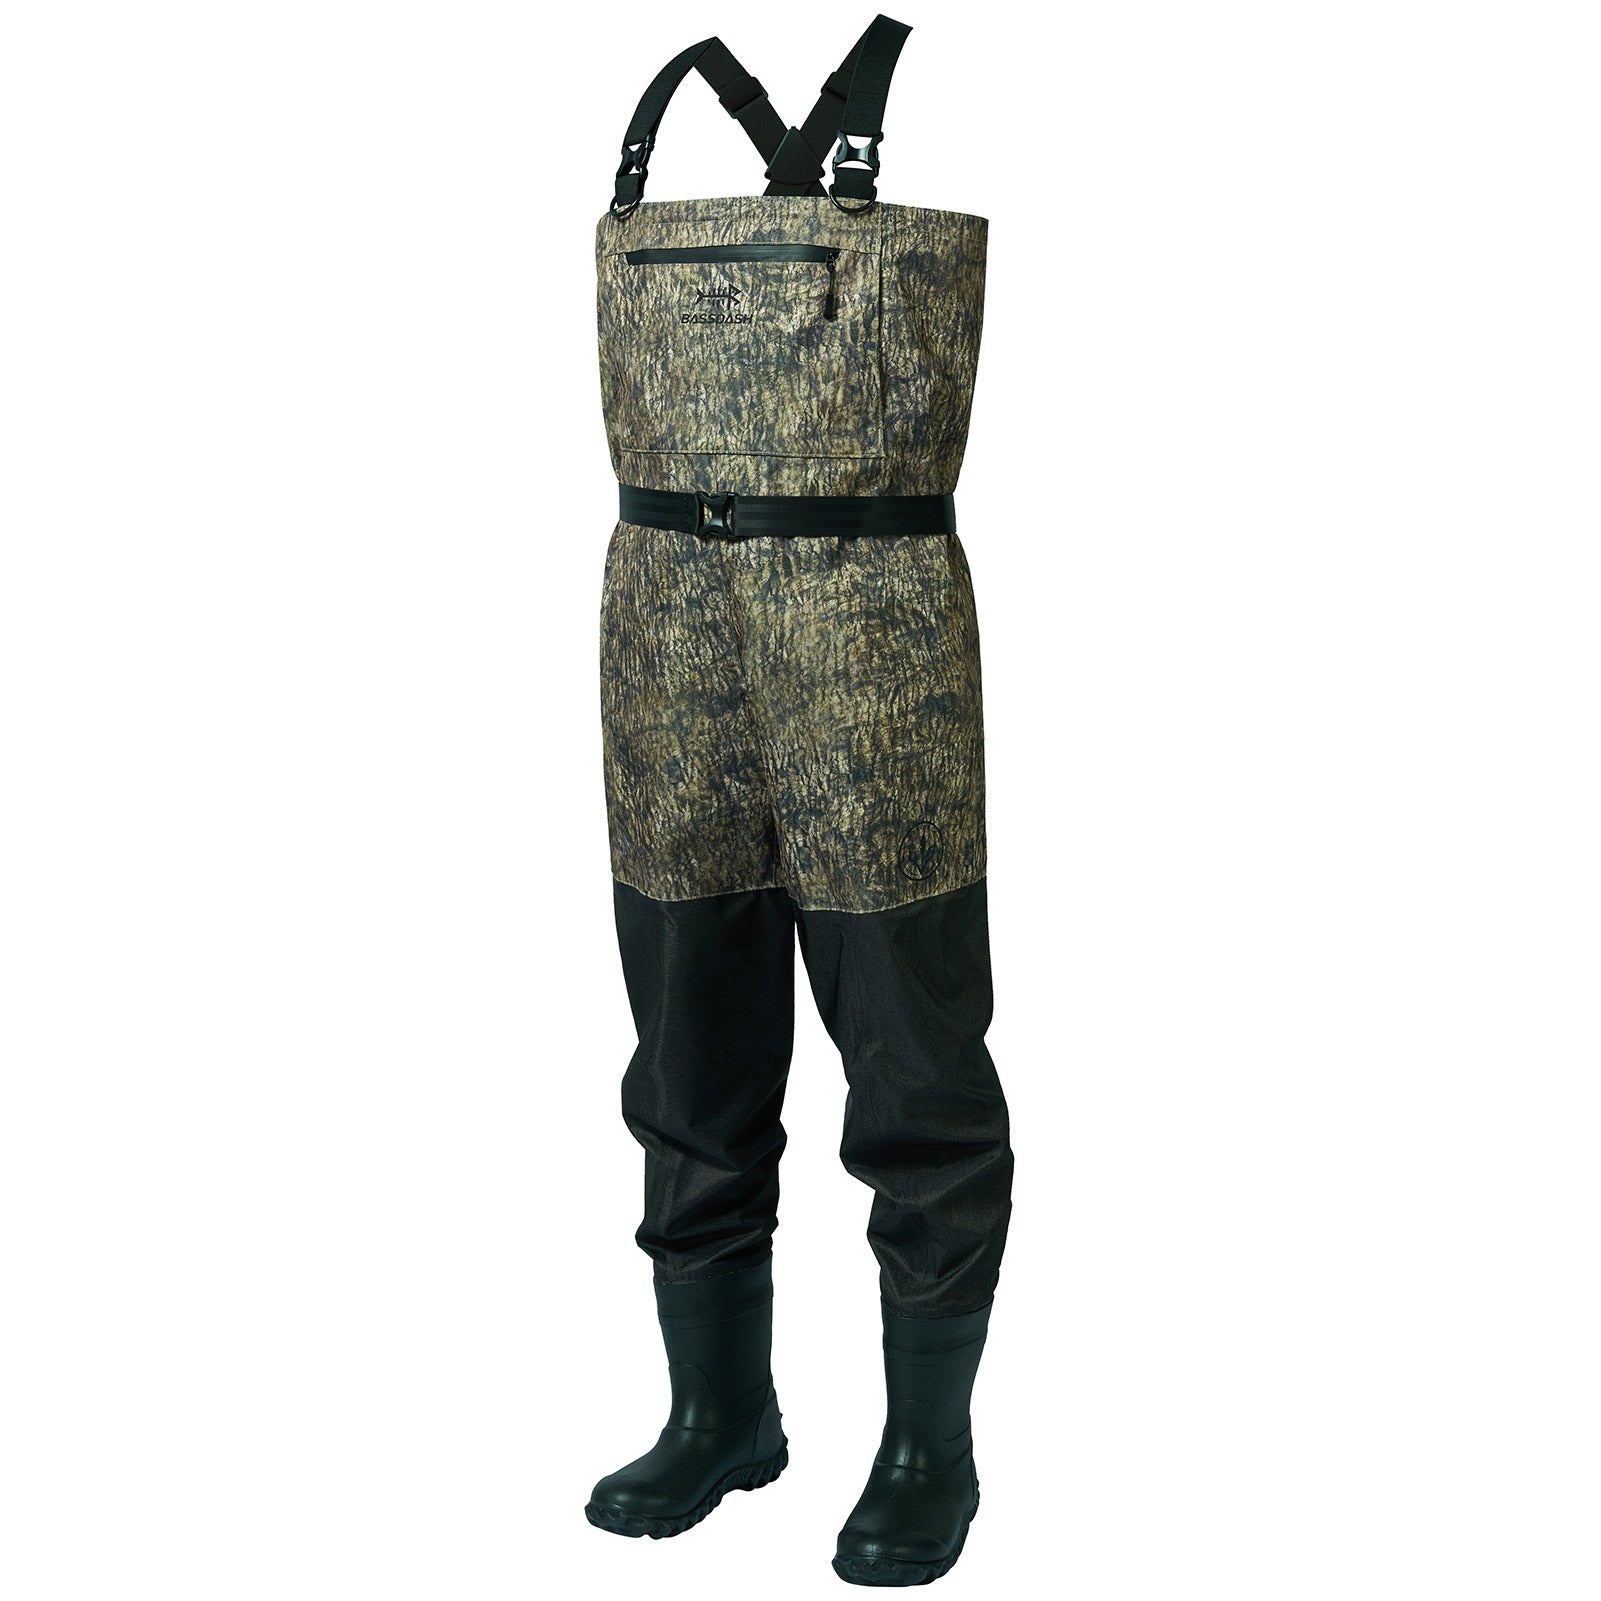 Fishing Thigh Boots, Fishing Waders For Men Women Hunting Chest Waders With  Waterproof Boots